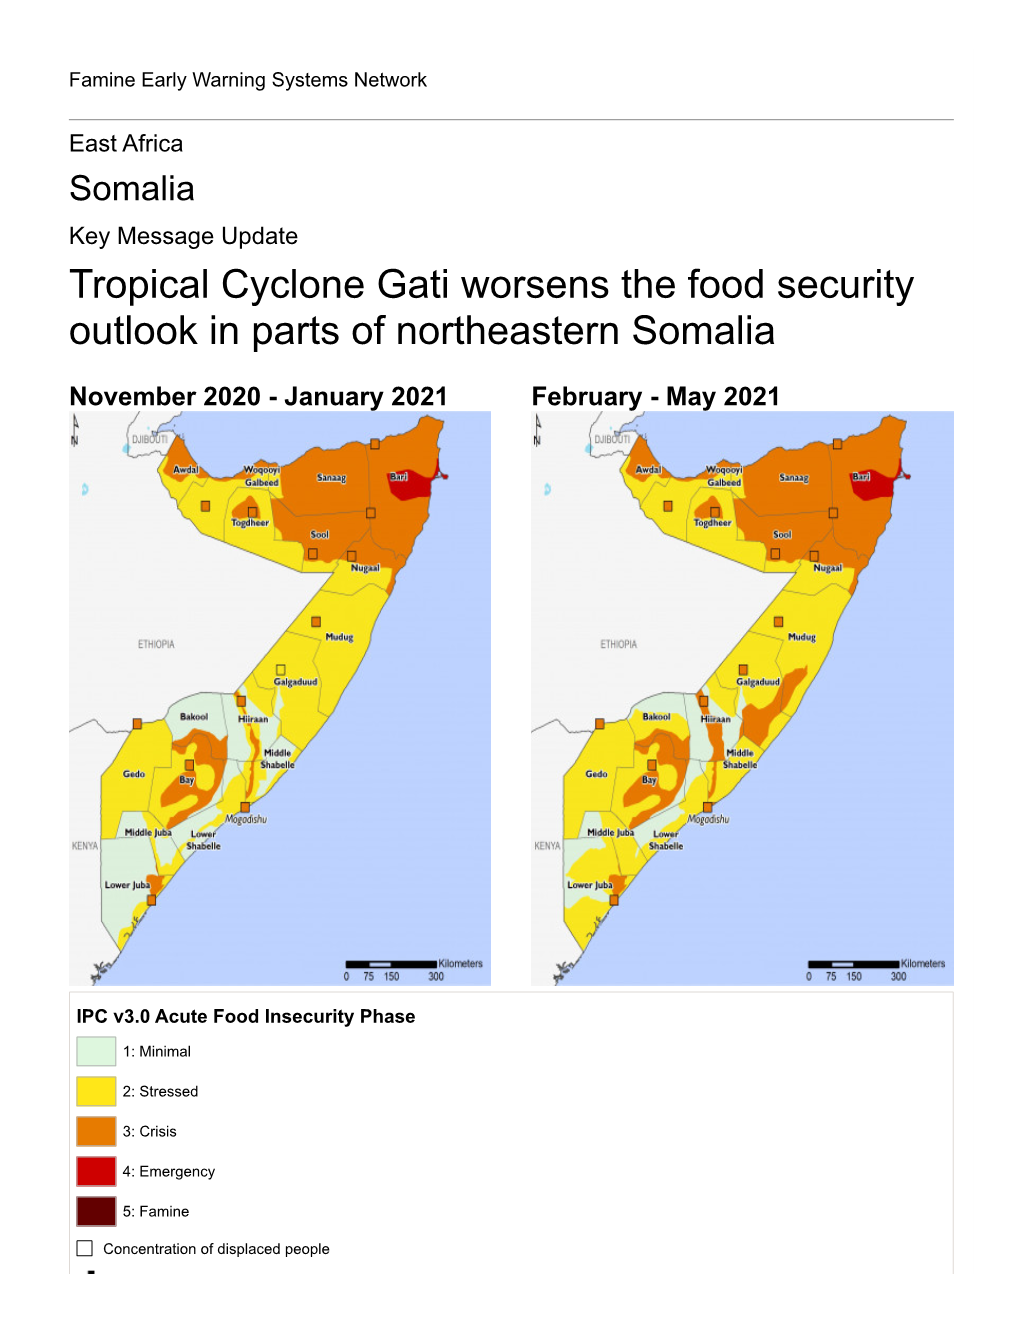 Tropical Cyclone Gati Worsens the Food Security Outlook in Parts of Northeastern Somalia